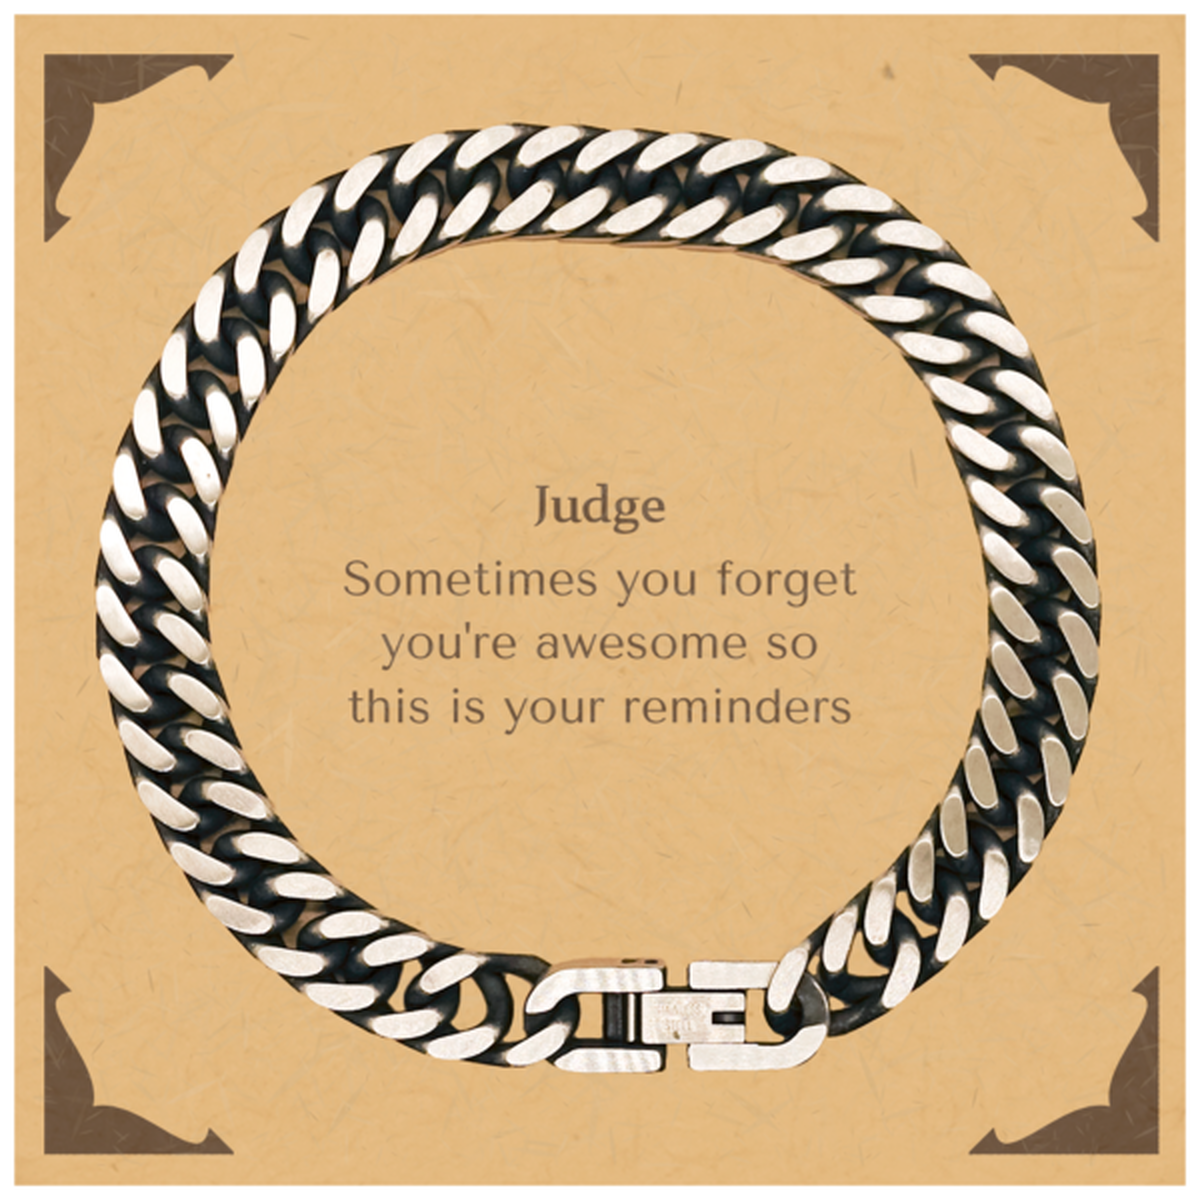 Sentimental Judge Cuban Link Chain Bracelet, Judge Sometimes you forget you're awesome so this is your reminders, Graduation Christmas Birthday Gifts for Judge, Men, Women, Coworkers